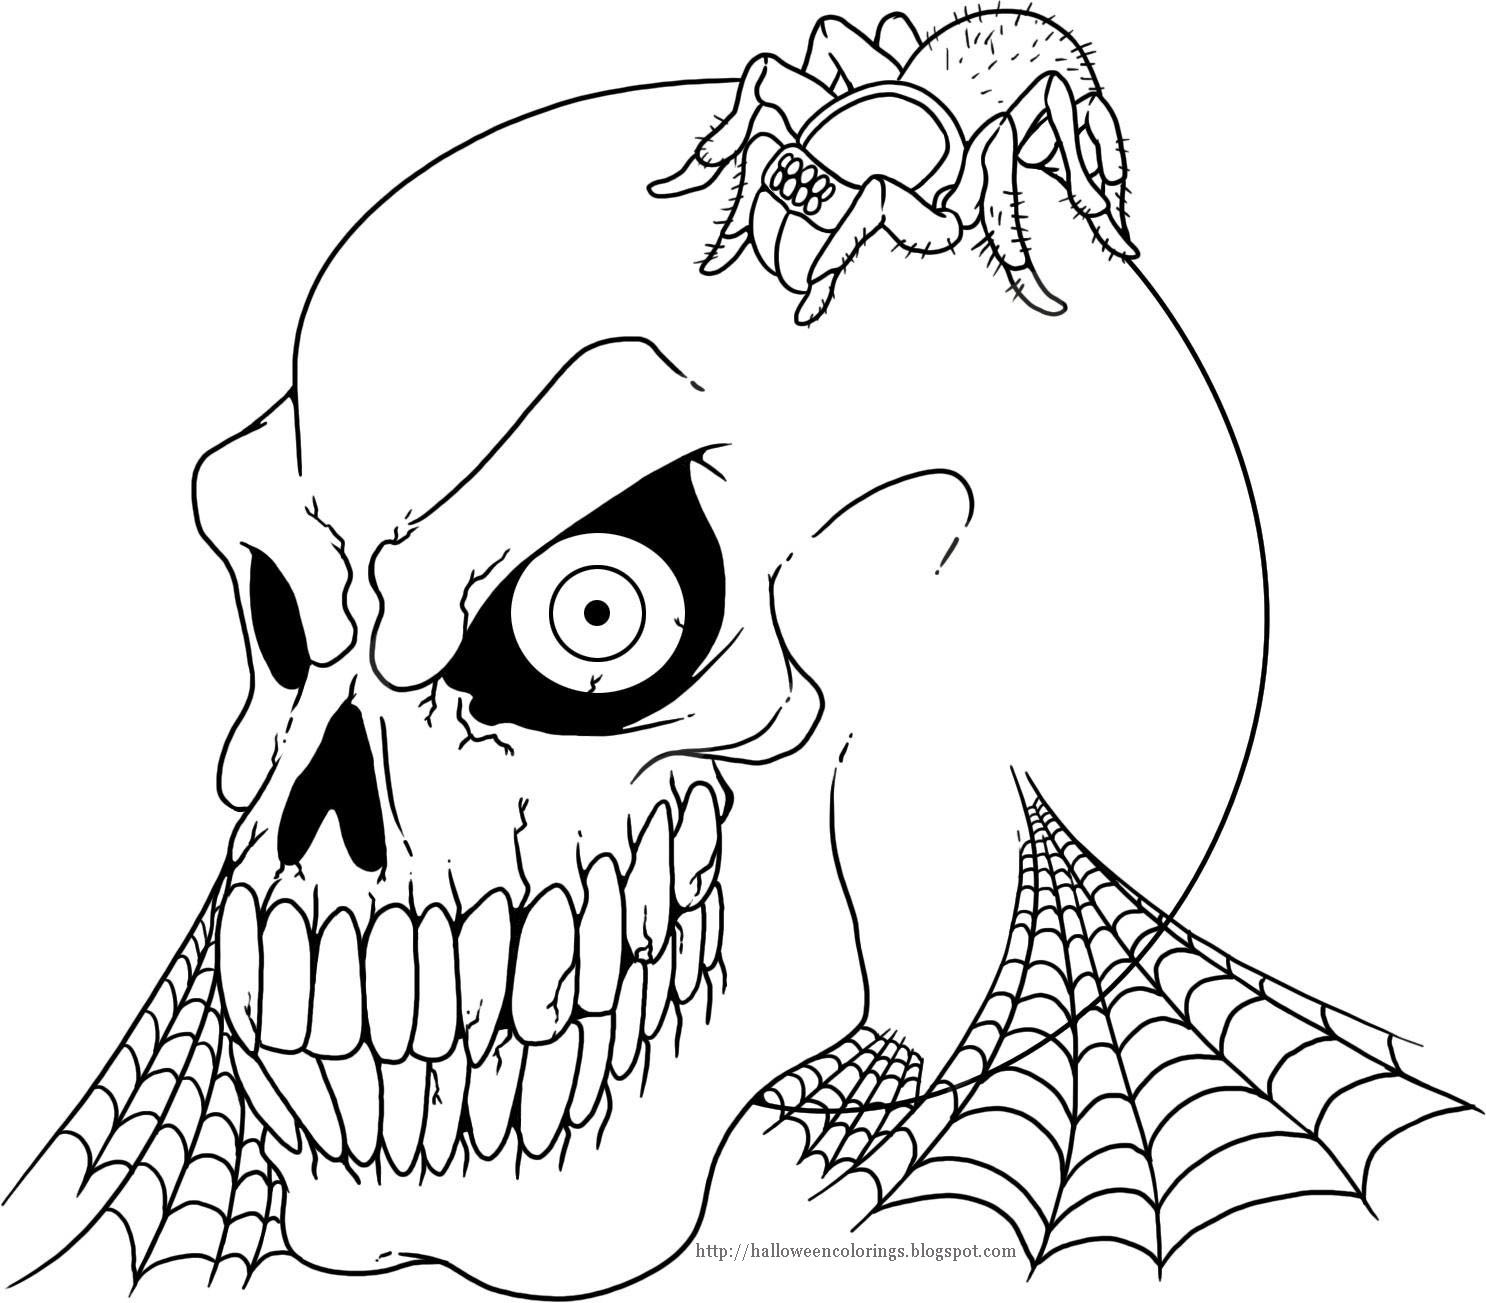 Coloring Pages For Teens Creapy
 HALLOWEEN COLORINGS